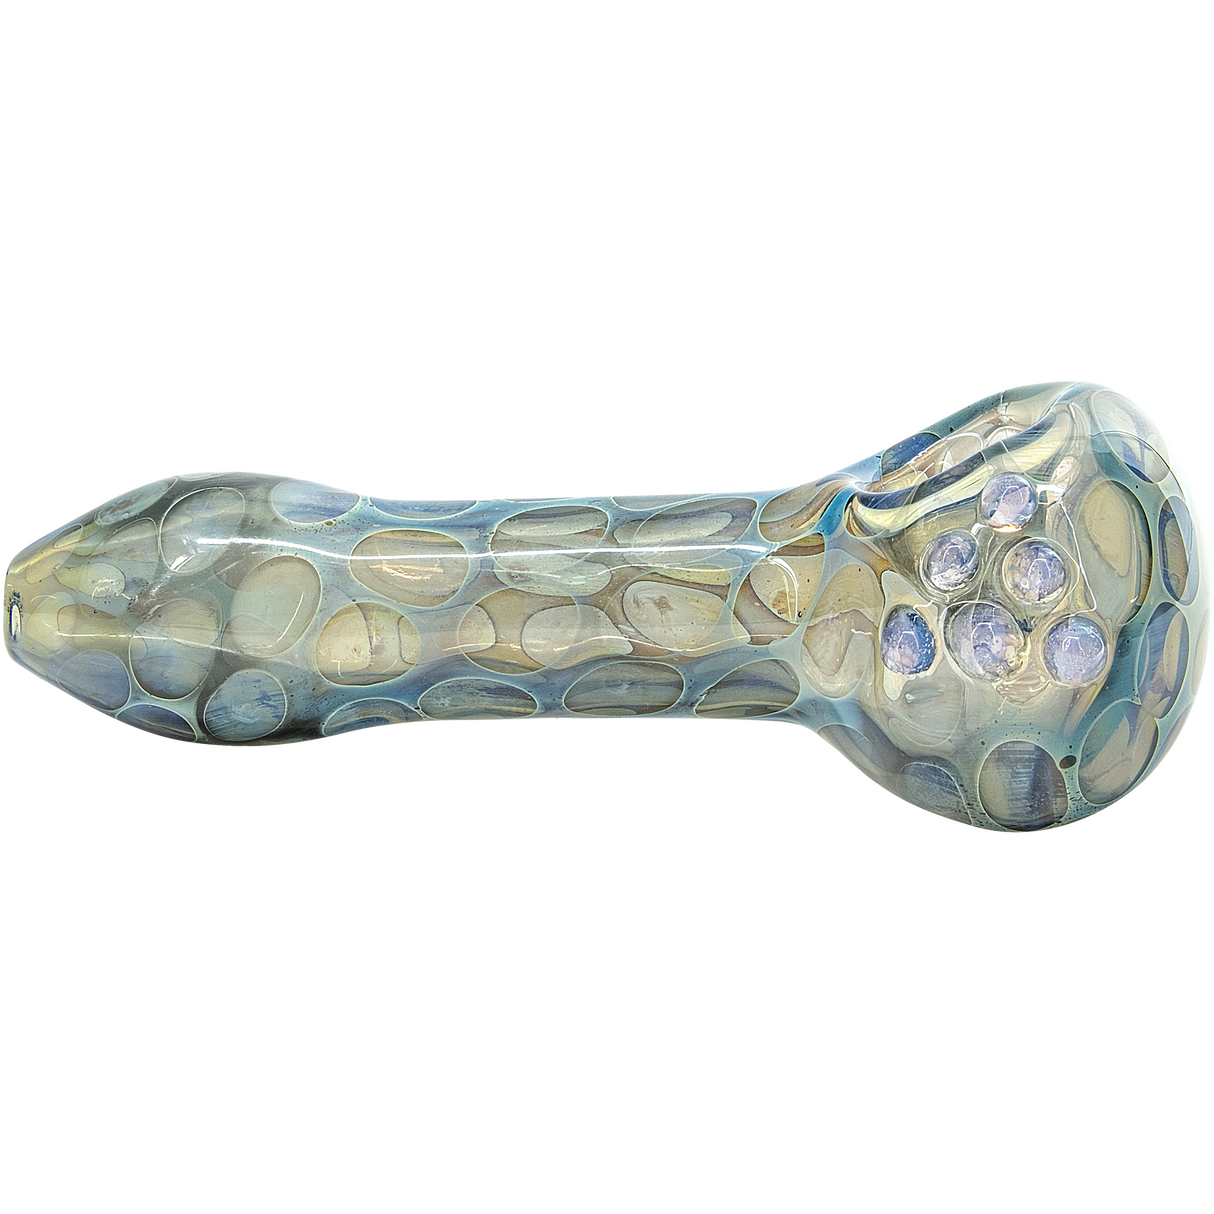 LA Pipes "Speckeled Moon" Silver Fumed Cobalt Spoon Pipe